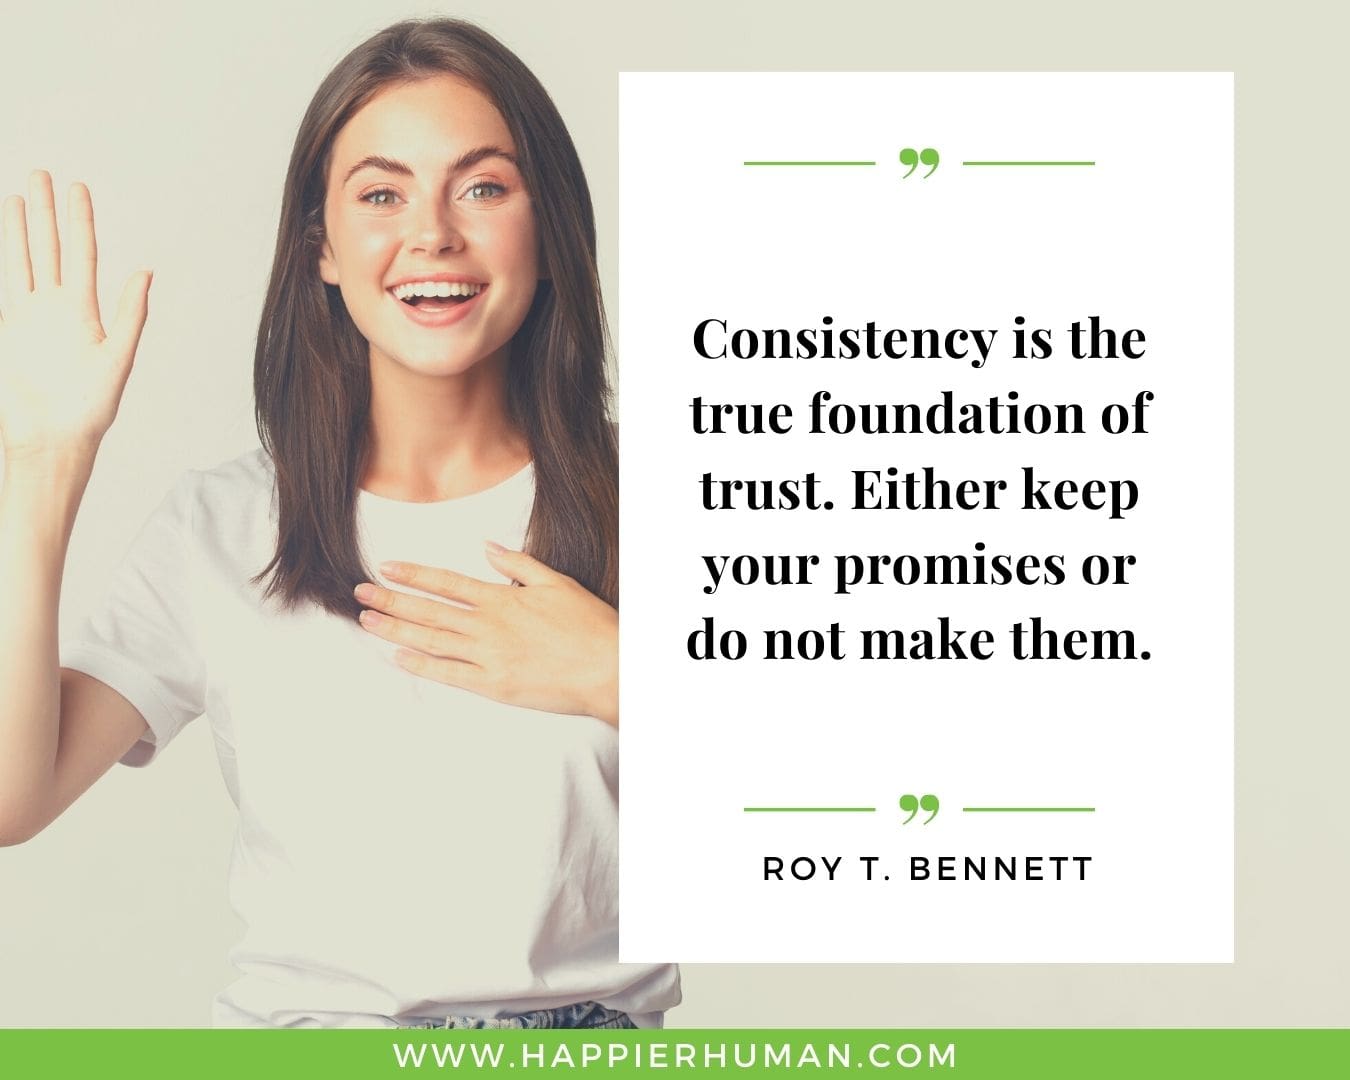 Broken Trust Quotes - “Consistency is the true foundation of trust. Either keep your promises or do not make them.” - Roy T. Bennett